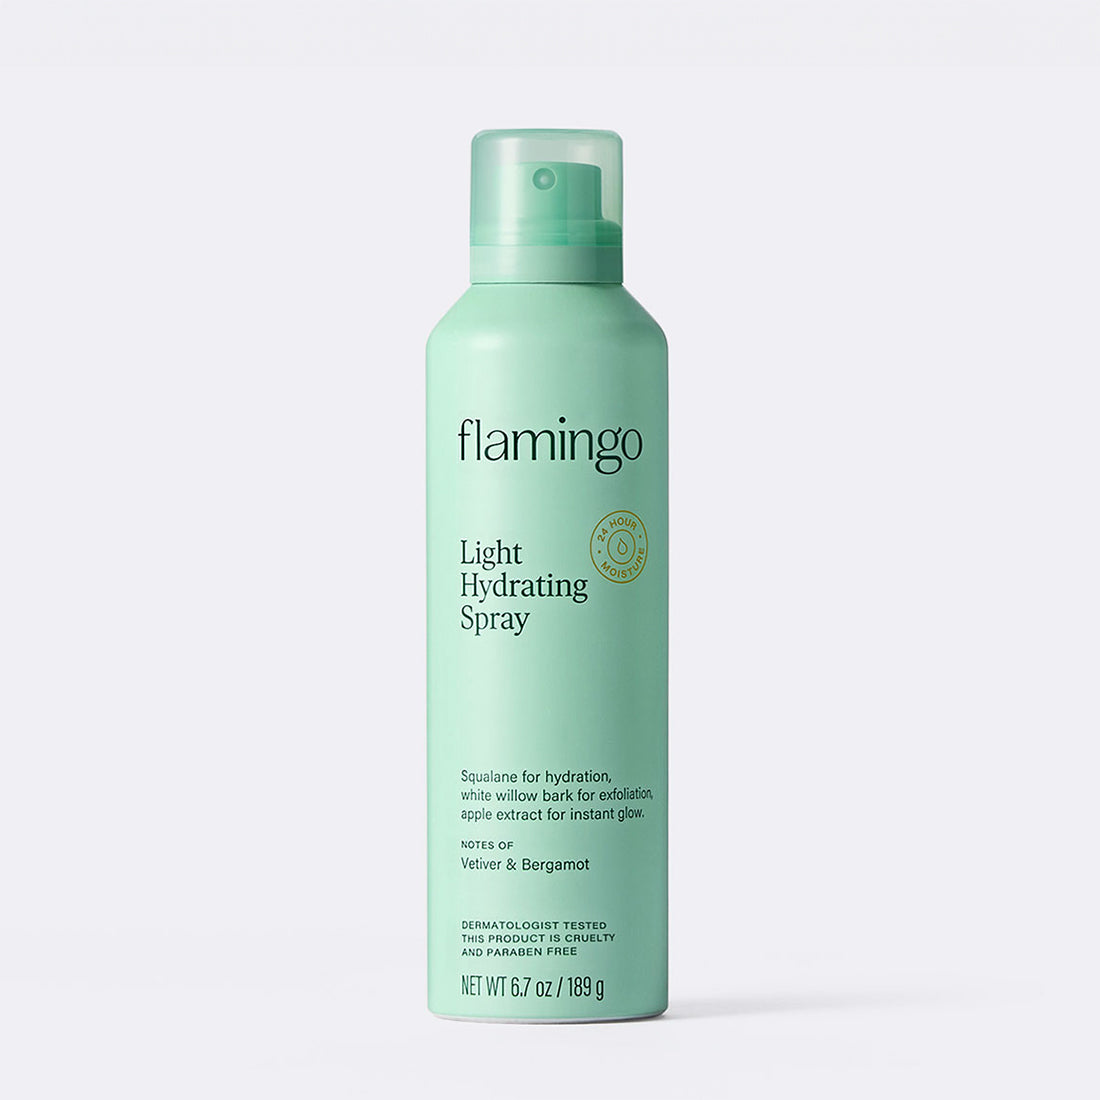 Pale green can of Flamingo Light Hydrating Spray